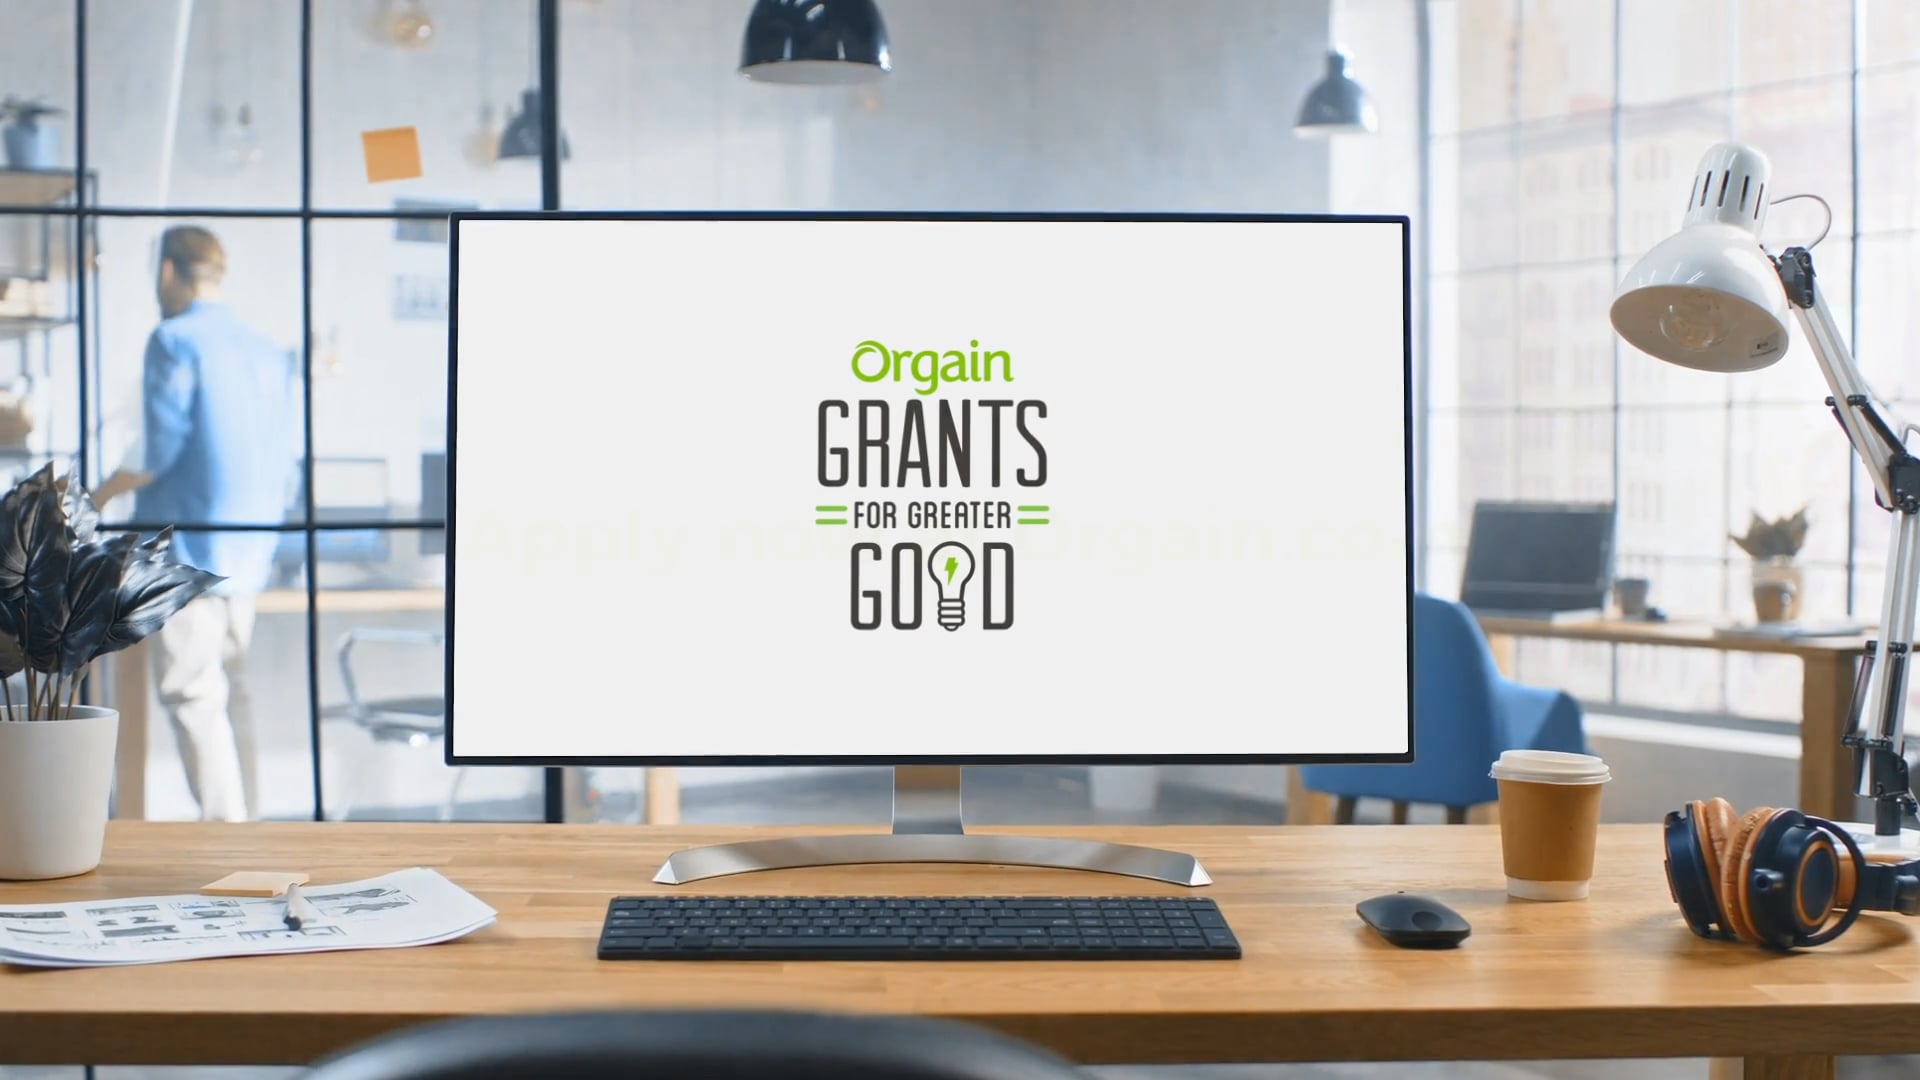 ORGAIN | :60 GRANTS FOR GREATER GOOD